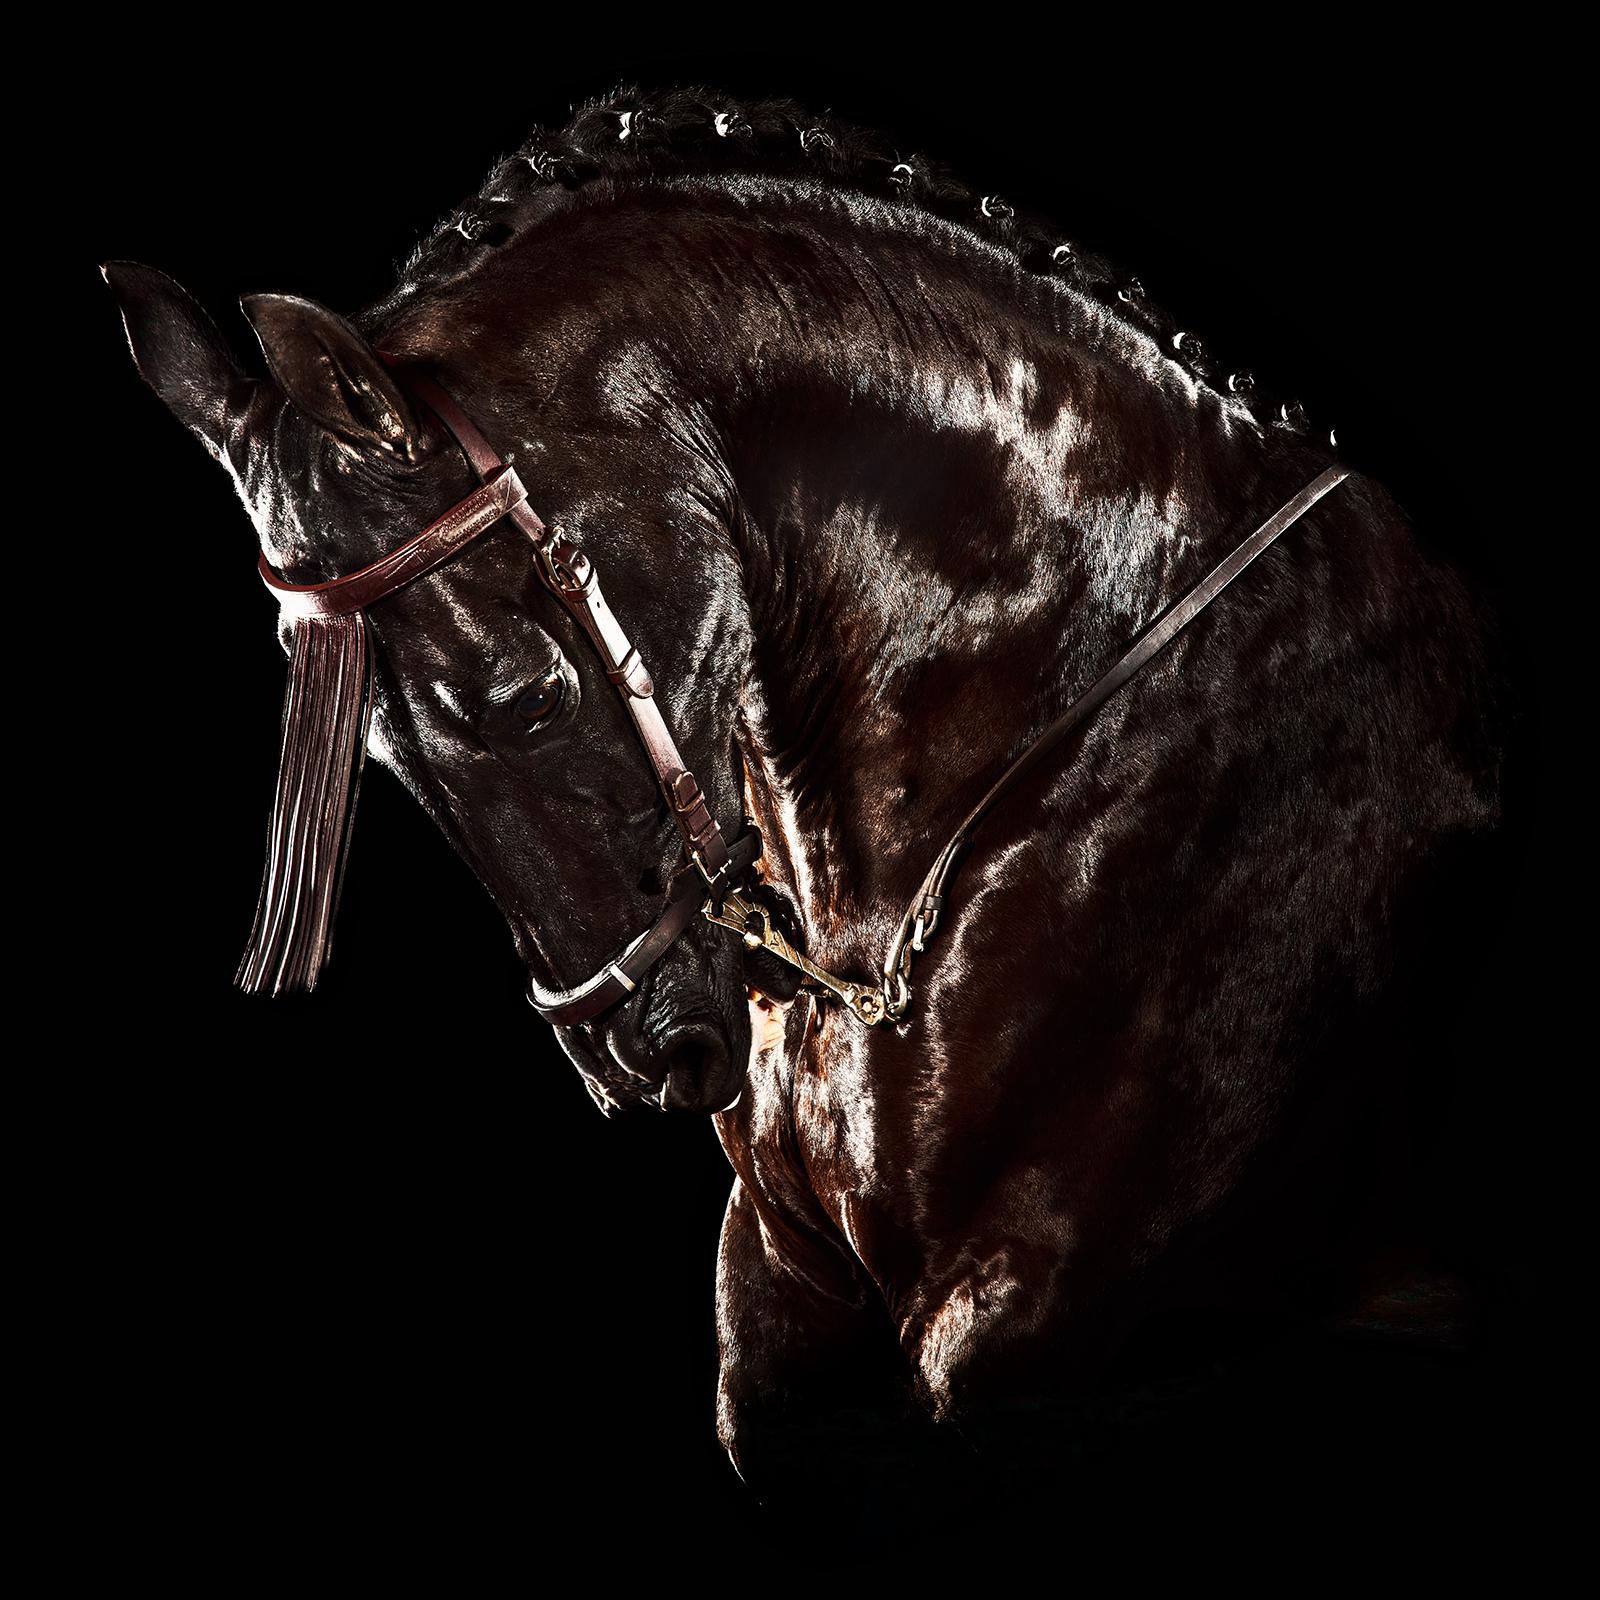 ' Horse 3 '- Signed limited edition archival pigment print, Edition of 5, square